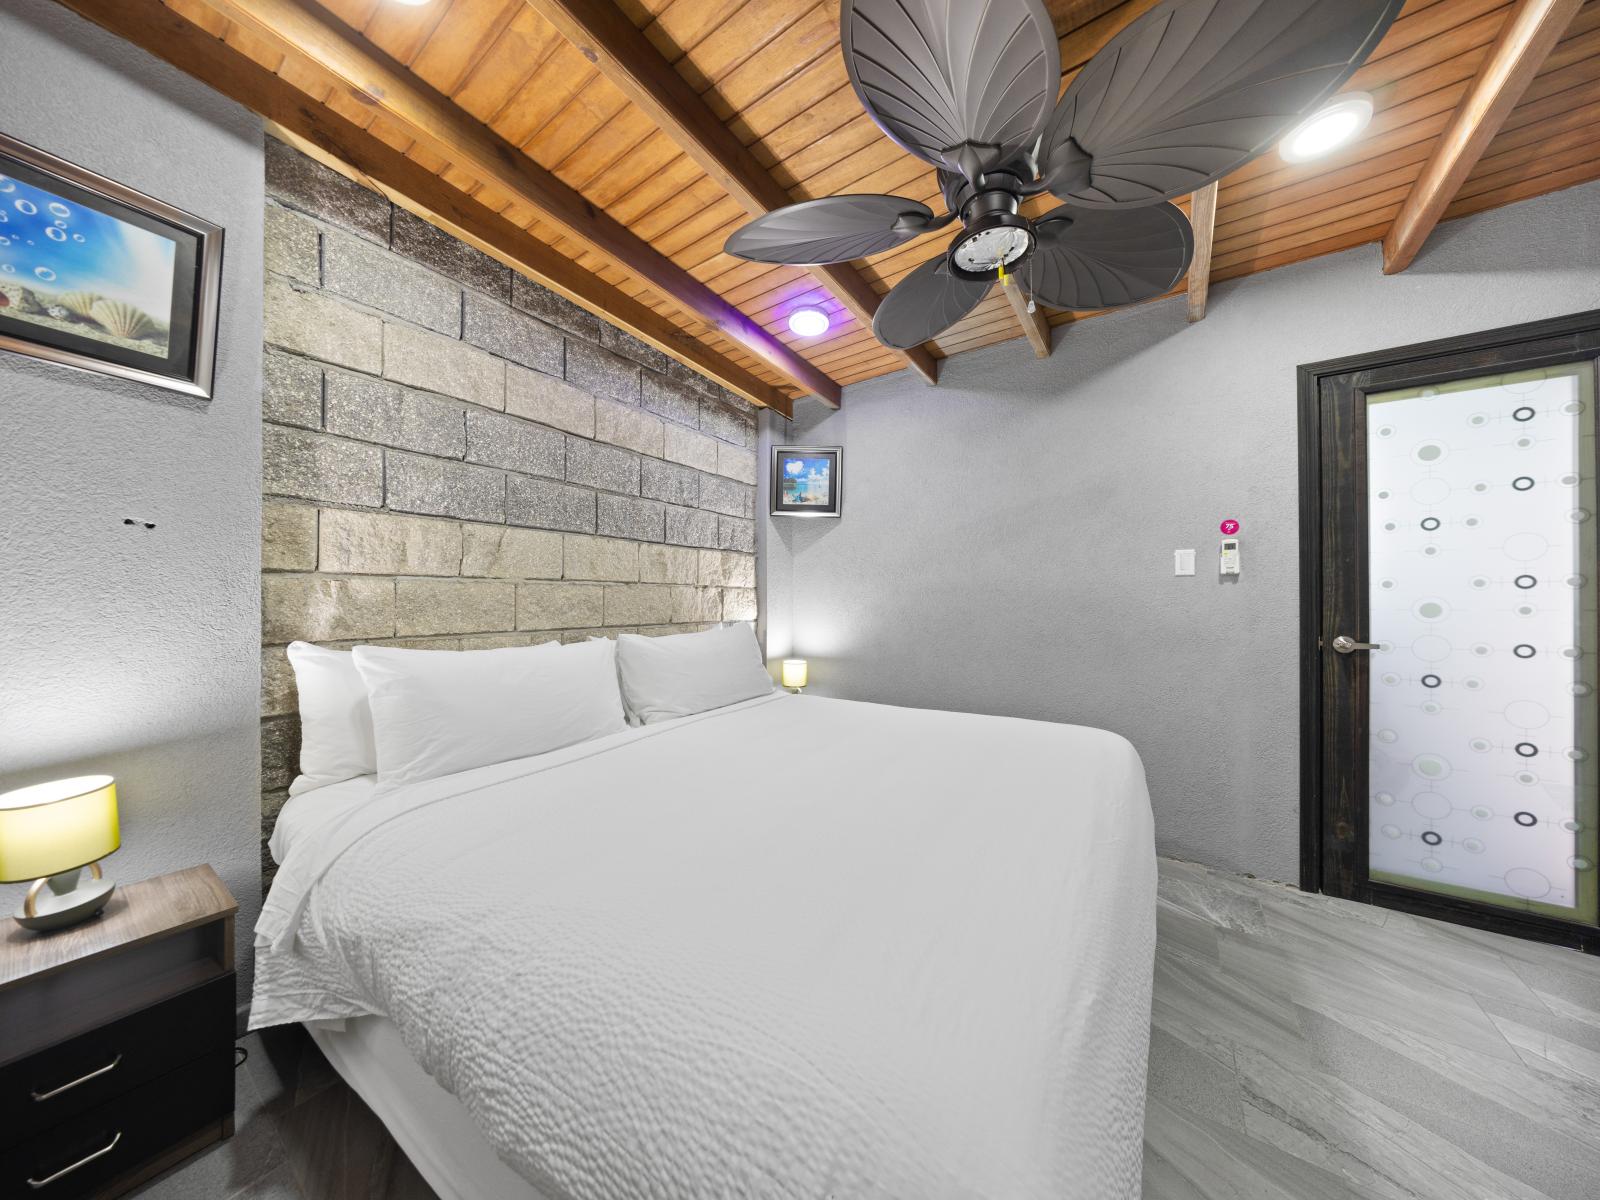 Experience the ultimate in relaxation in serene bedroom of the home in Aruba - Cozy retreat with a plush king size bed, perfect for relaxation - Privacy is the key here, located on a separate apartment for added convenience